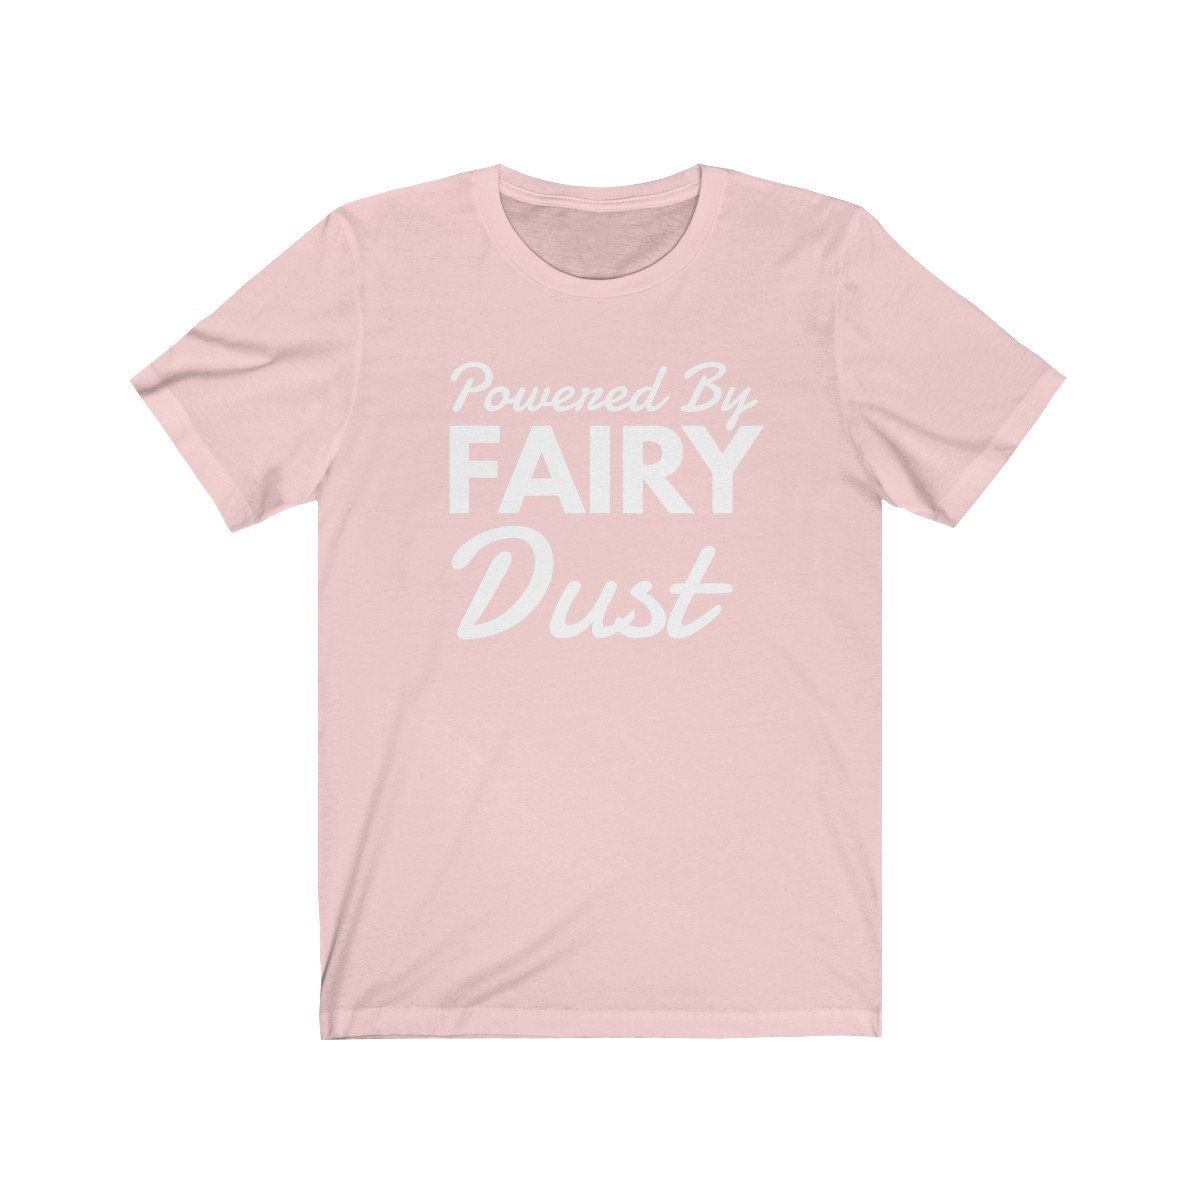 Powered by Fairy Dust Shirt Powered by Fairy Dust Tshirt - Etsy